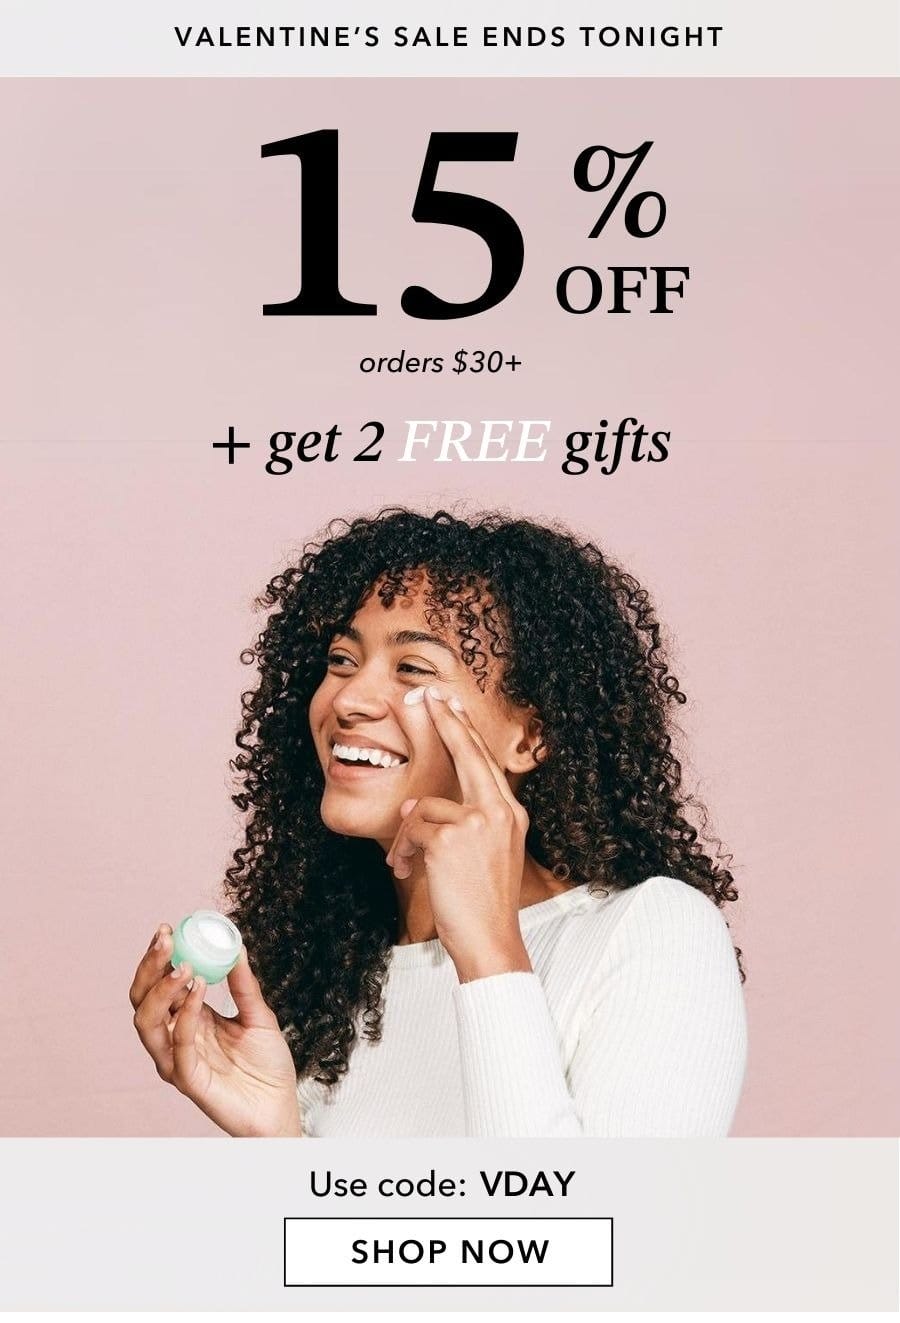 Valentine's Sale: 15% off+ 2 free gifts